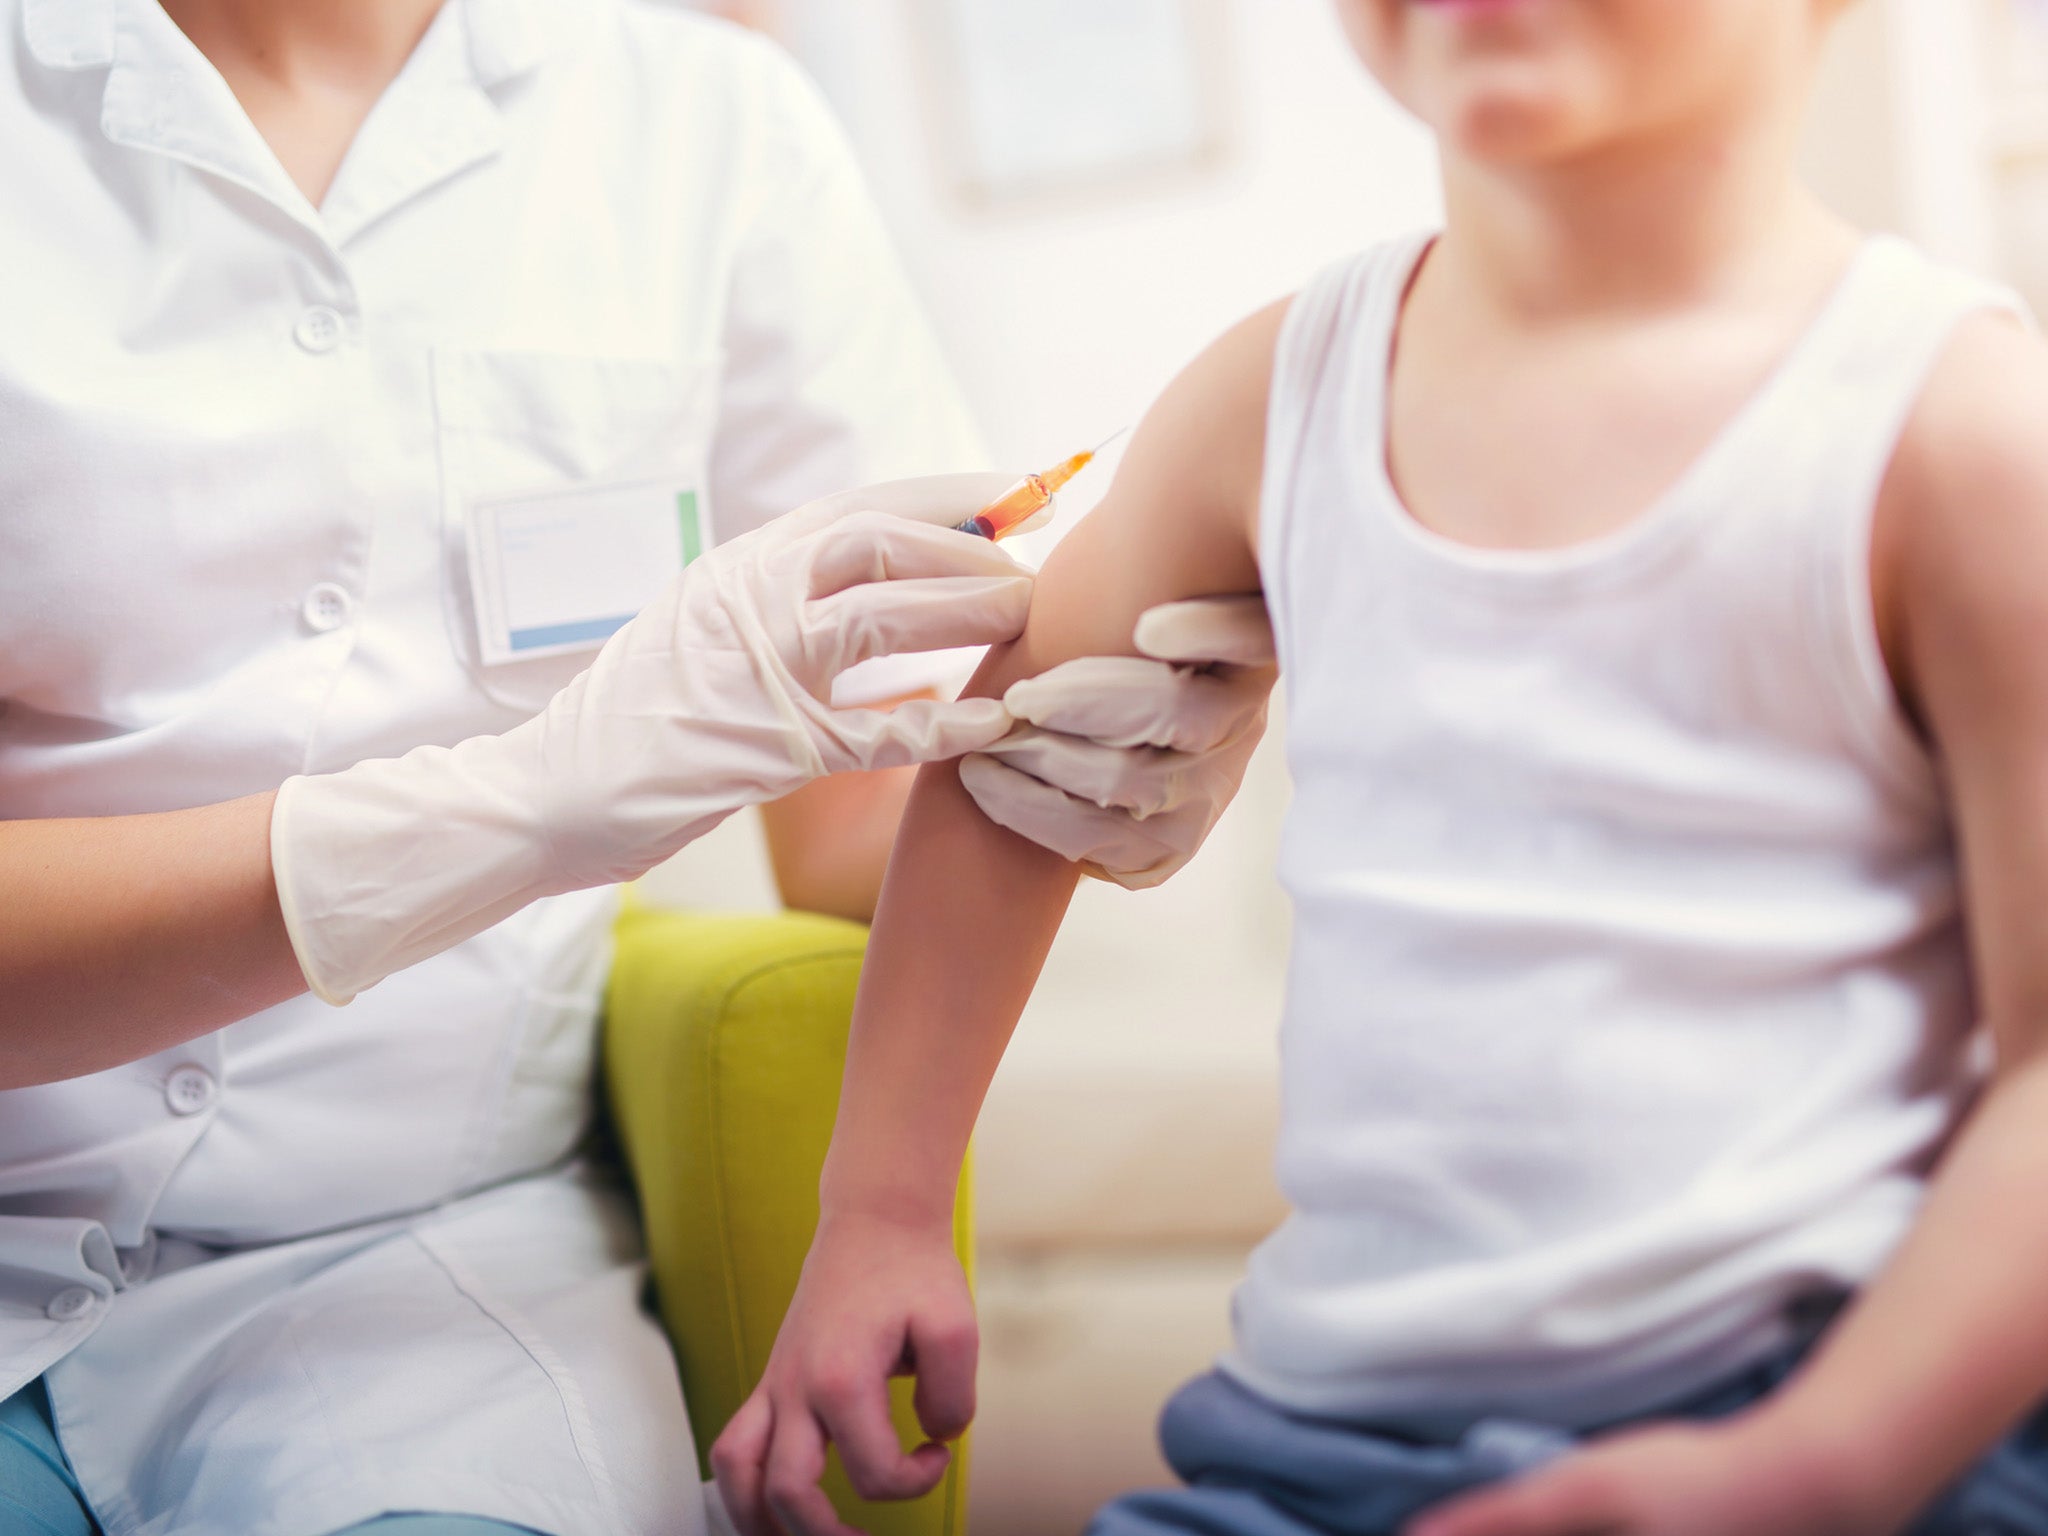 Should governments go further to make measles vaccines compulsory?